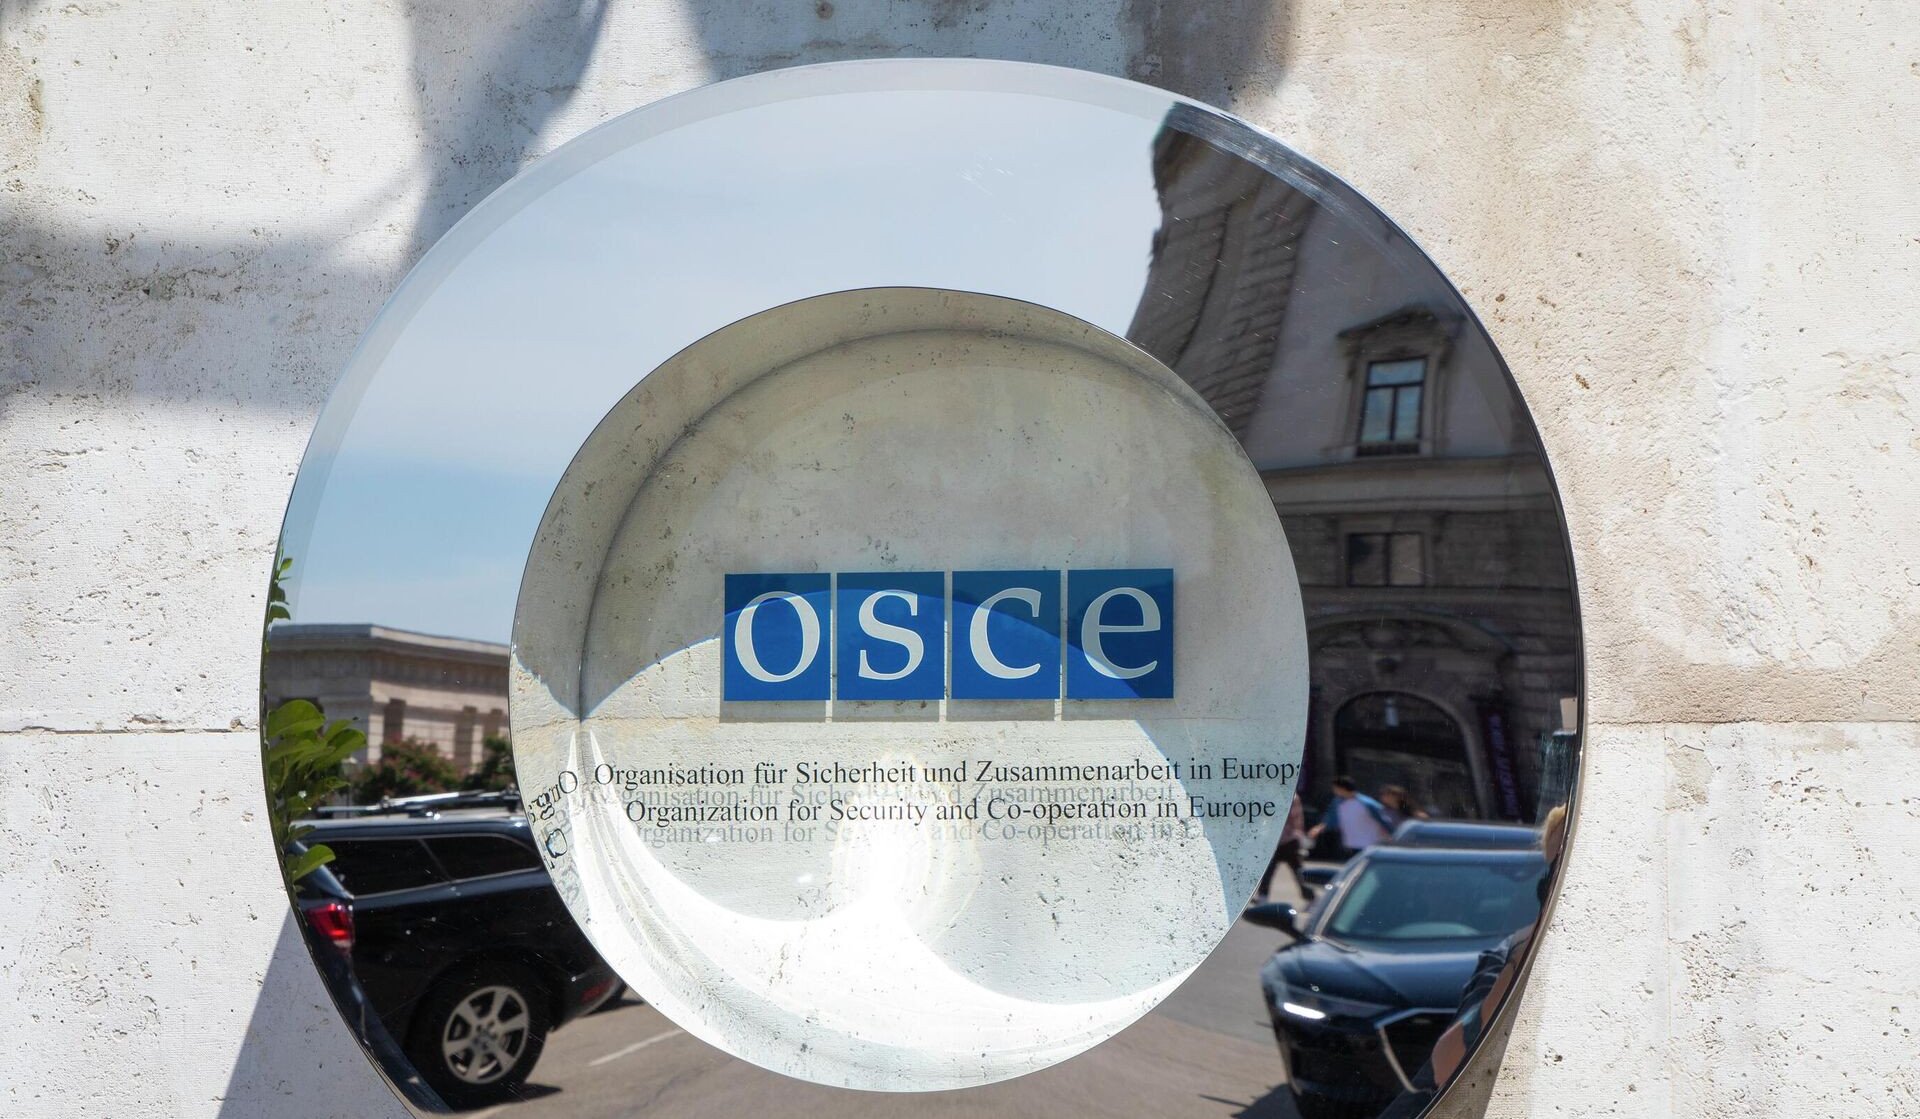 Acting Chairman of OSCE discussed with French foreign minister issue of sending OSCE mission to Armenian-Azerbaijani border